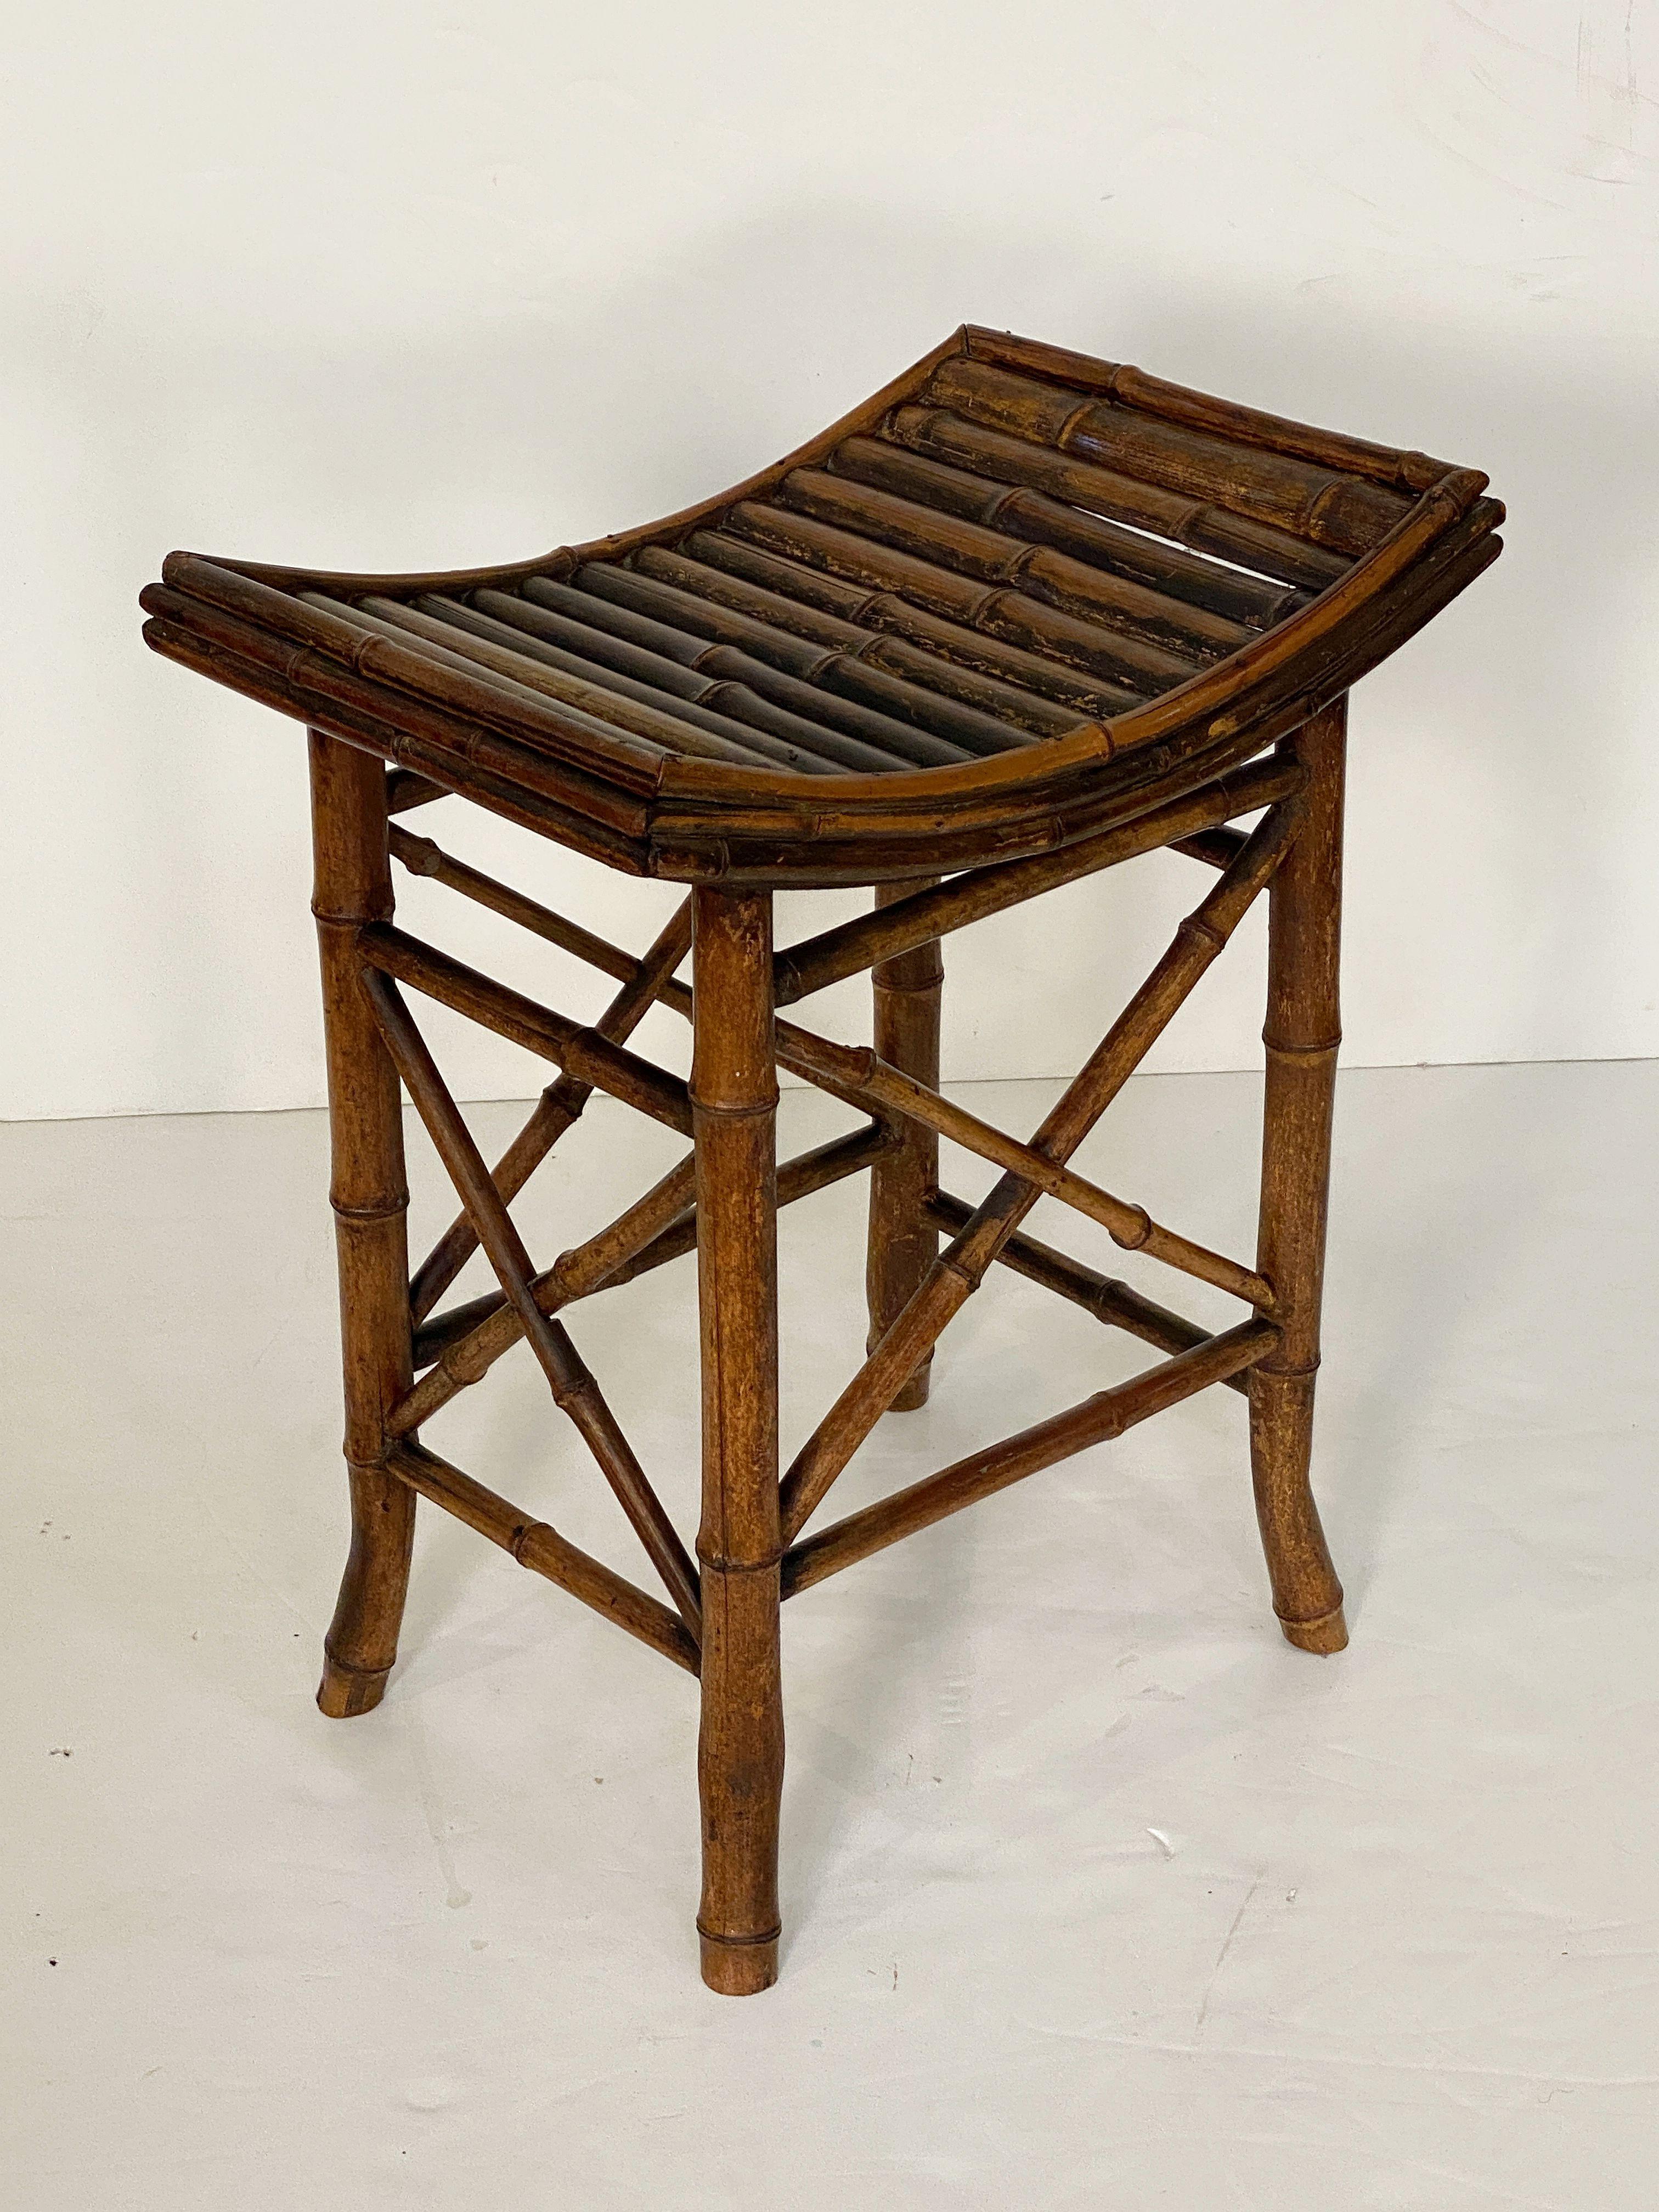 English Bamboo Bench or Stool with Saddle Seat from the Aesthetic Movement Era For Sale 2